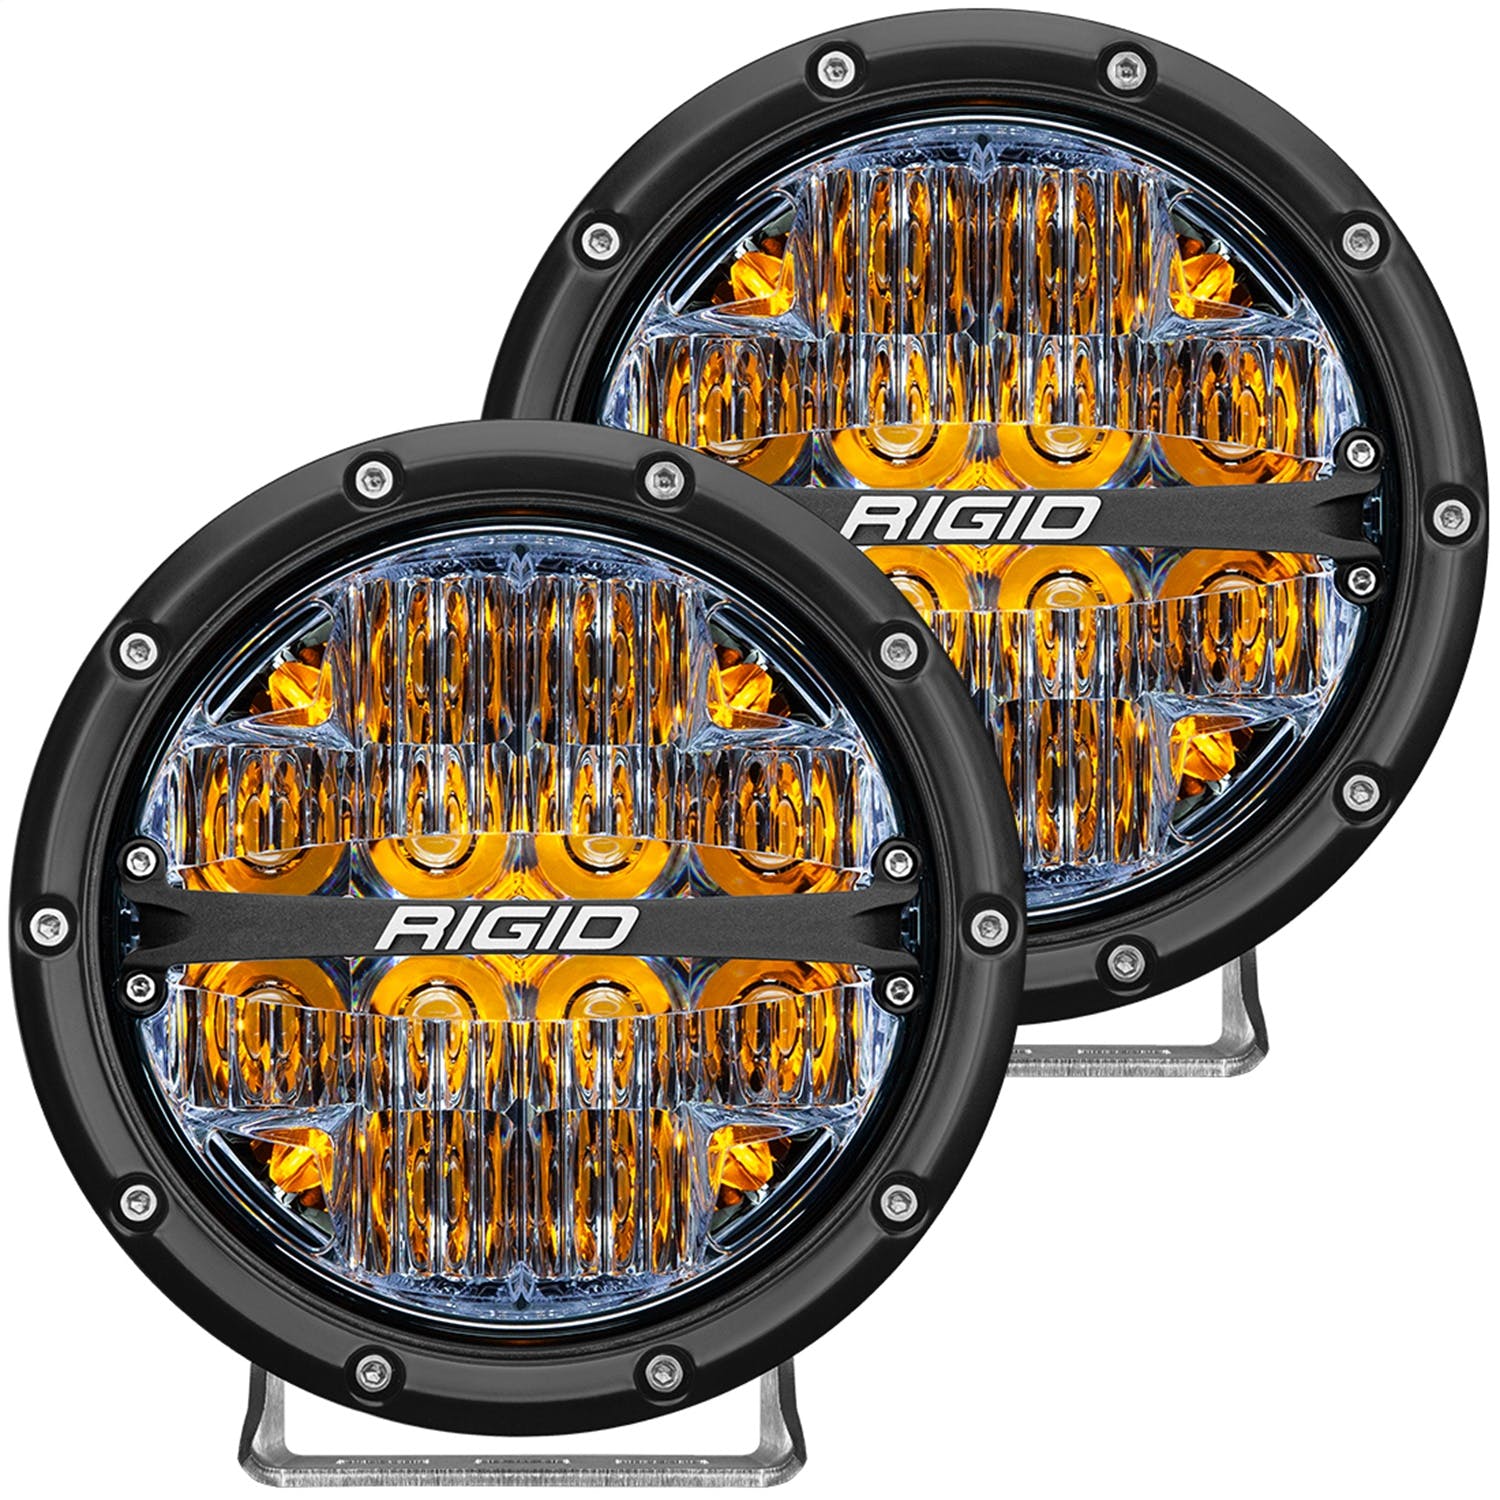 RIGID Industries 36206 360-Series 6in LED Off-Road Drive Beam Amber Backlight Pair